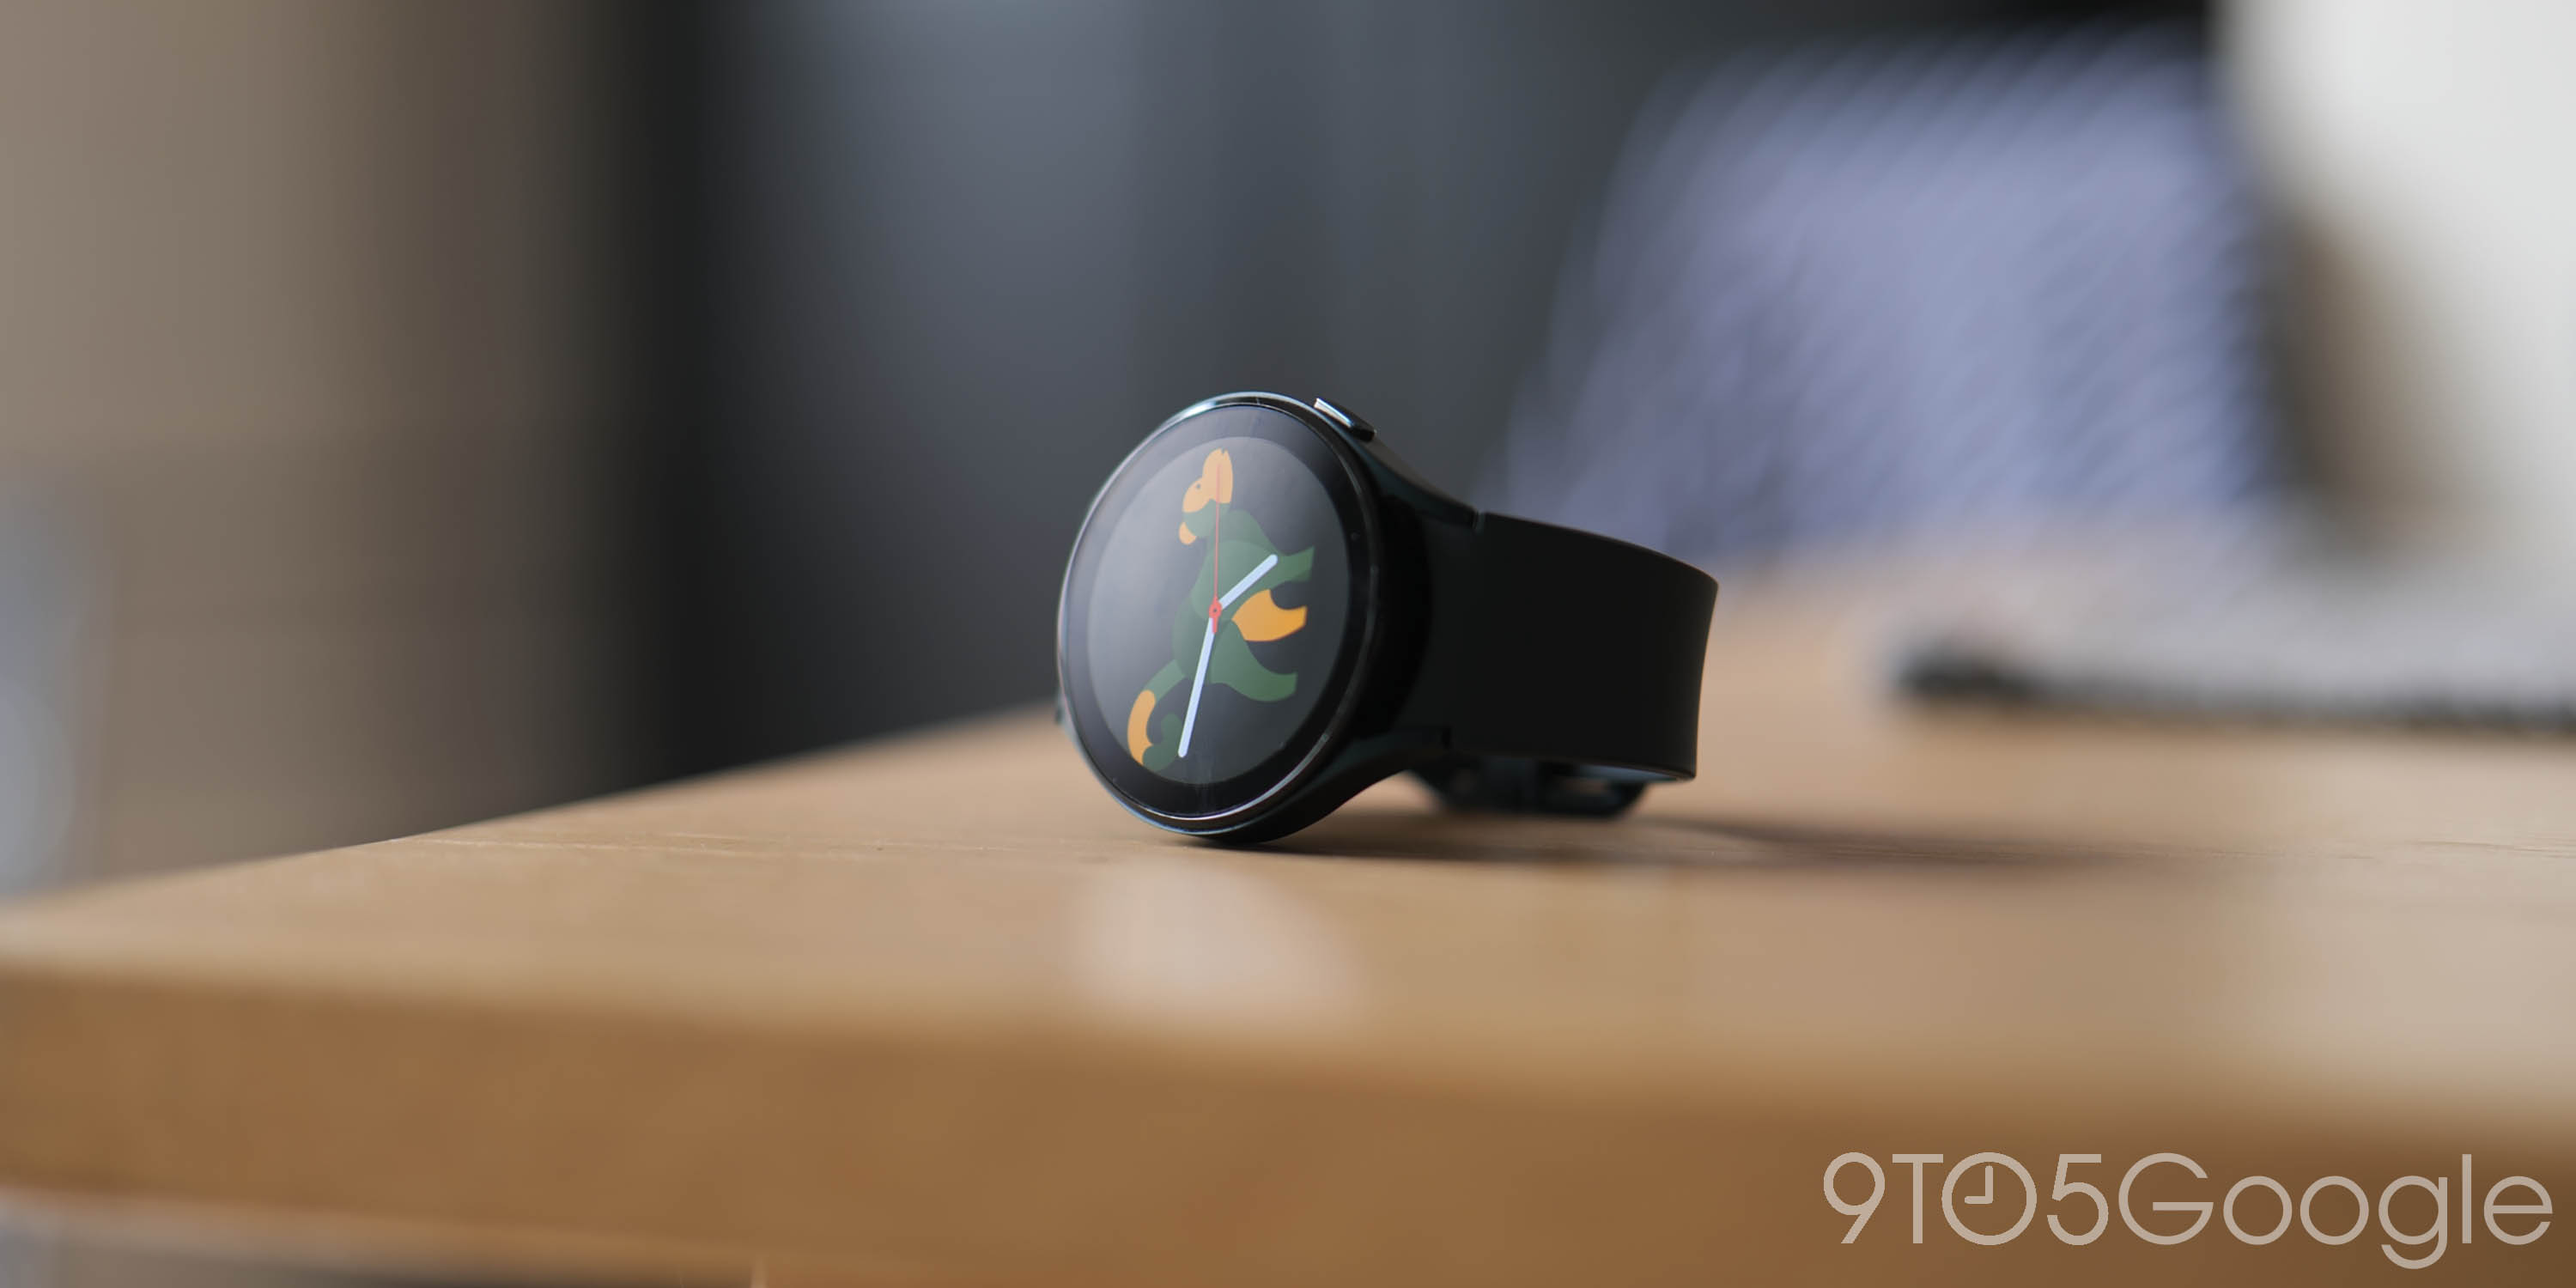 Galaxy Watch 4's newest update adds profile photos to Google 